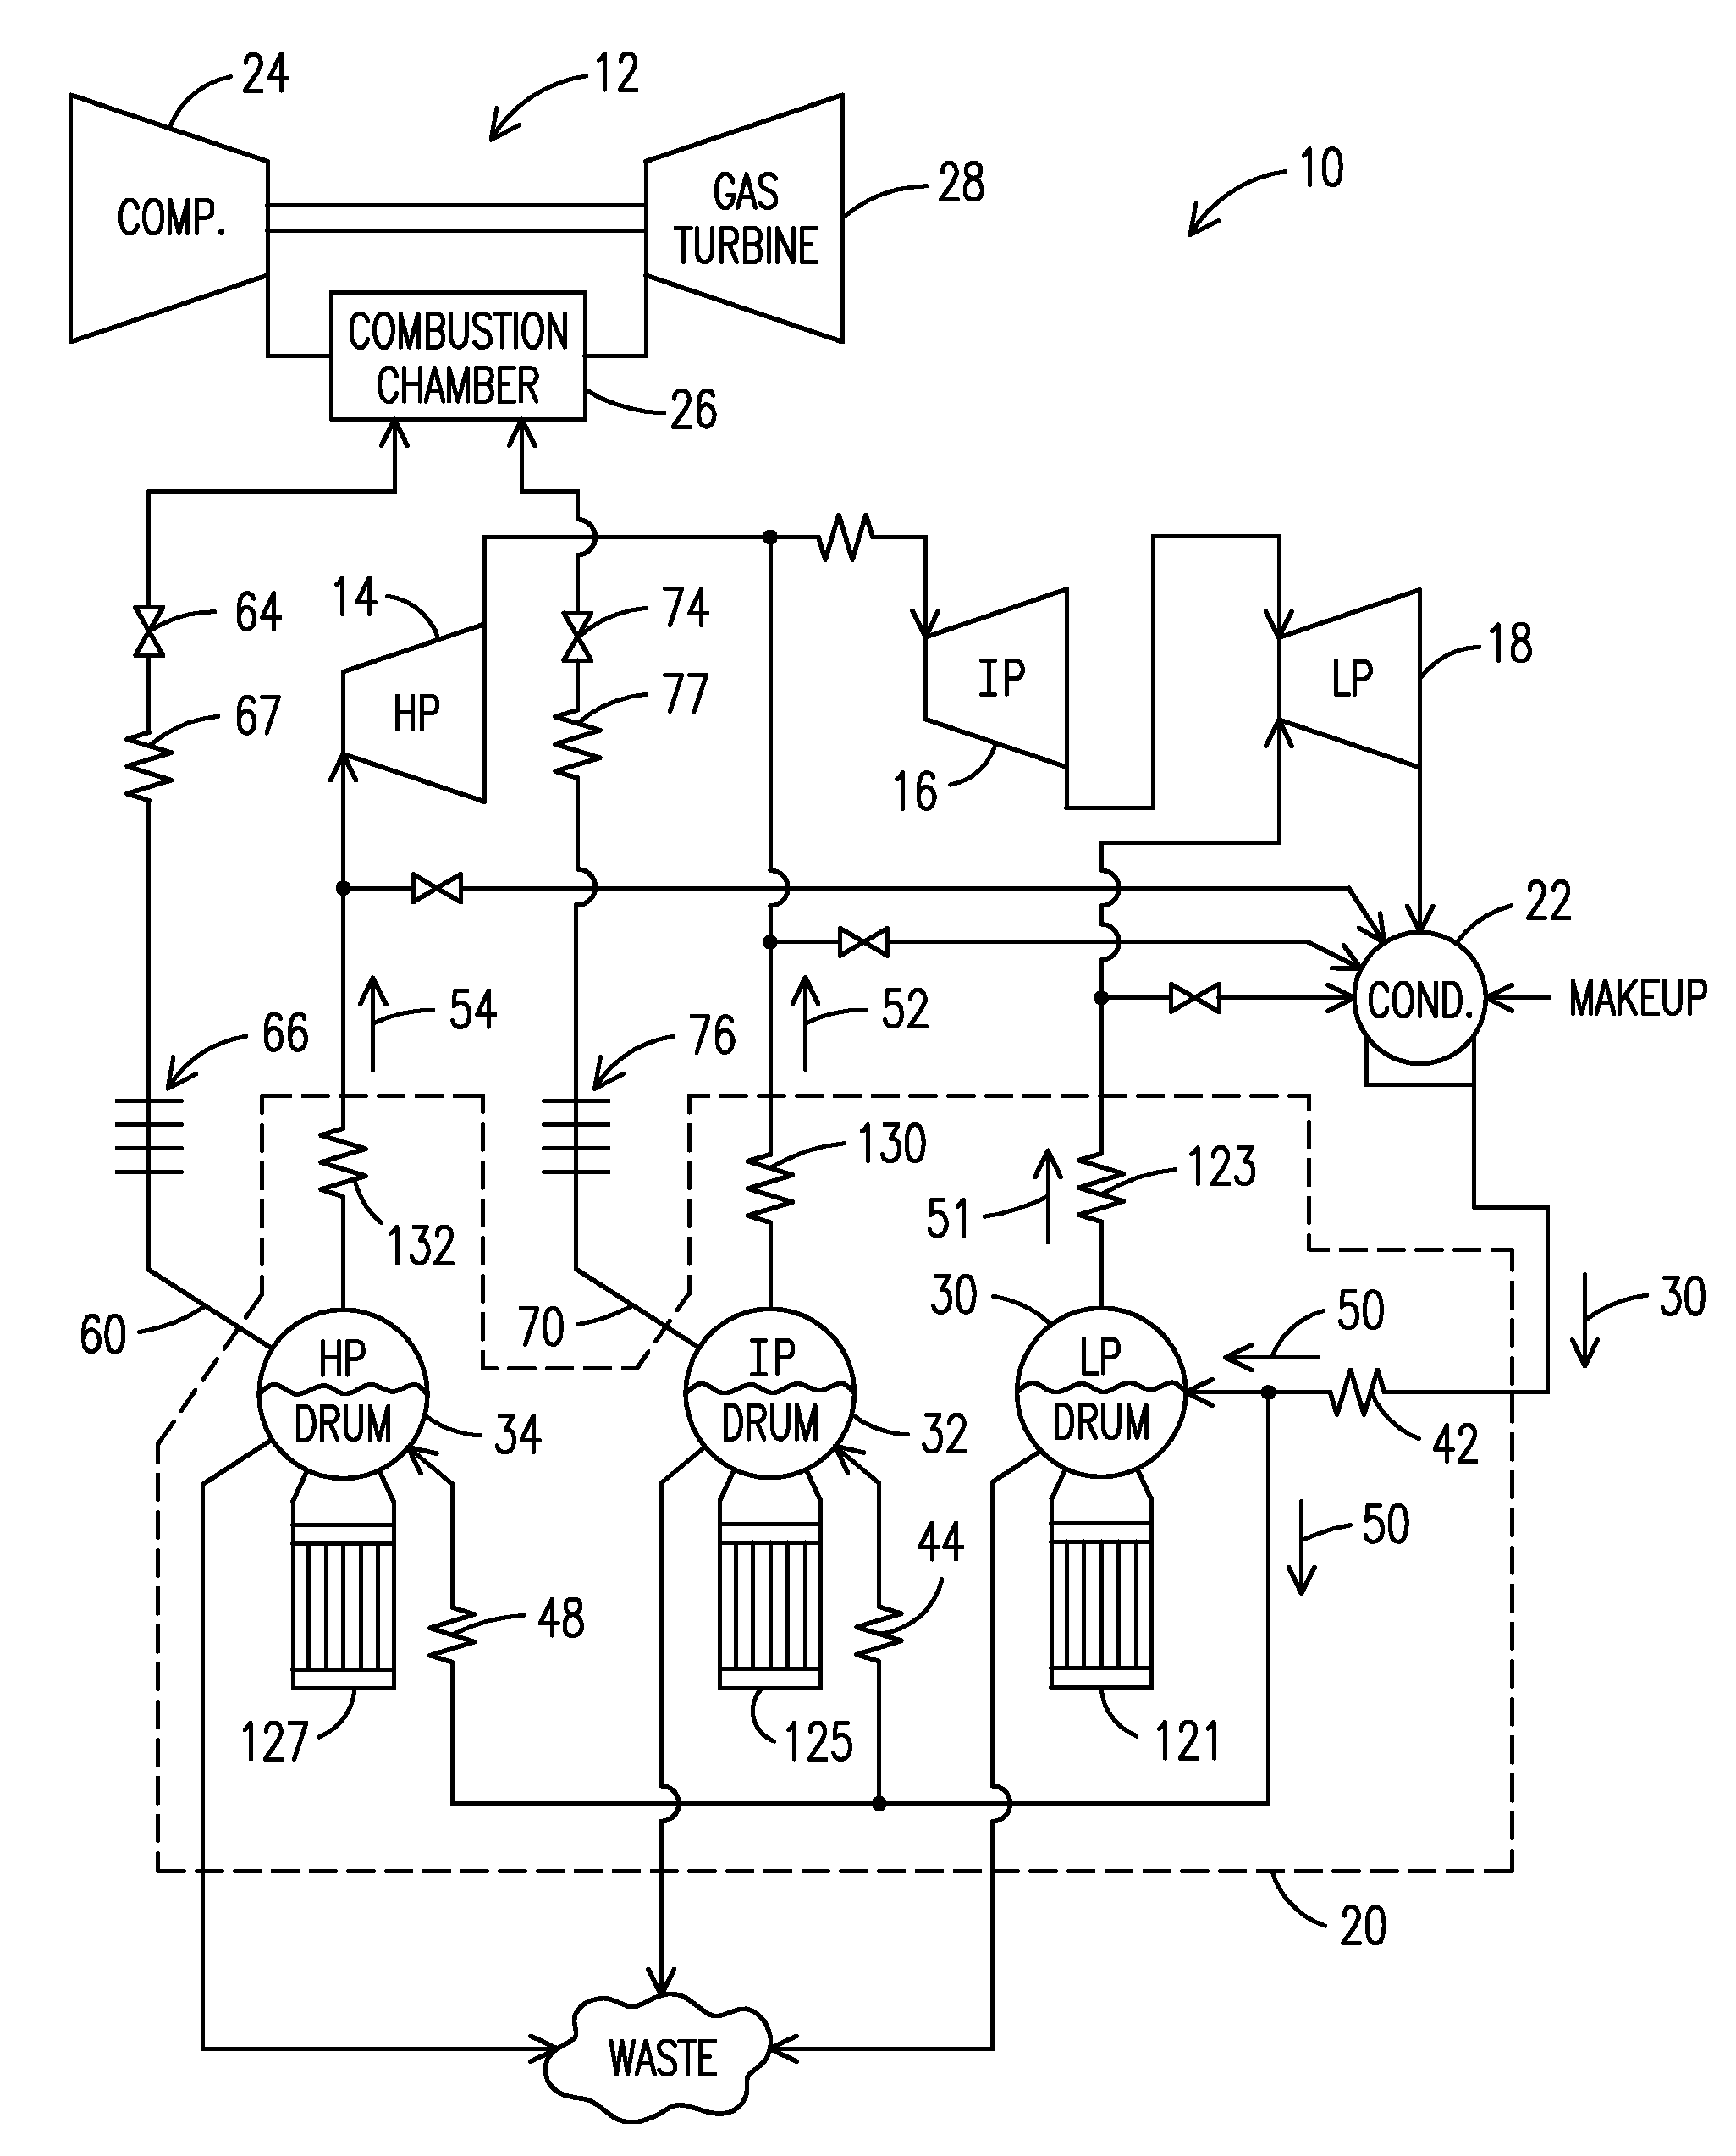 Method for Removal of Entrained Gas in a Combined Cycle Power Generation System